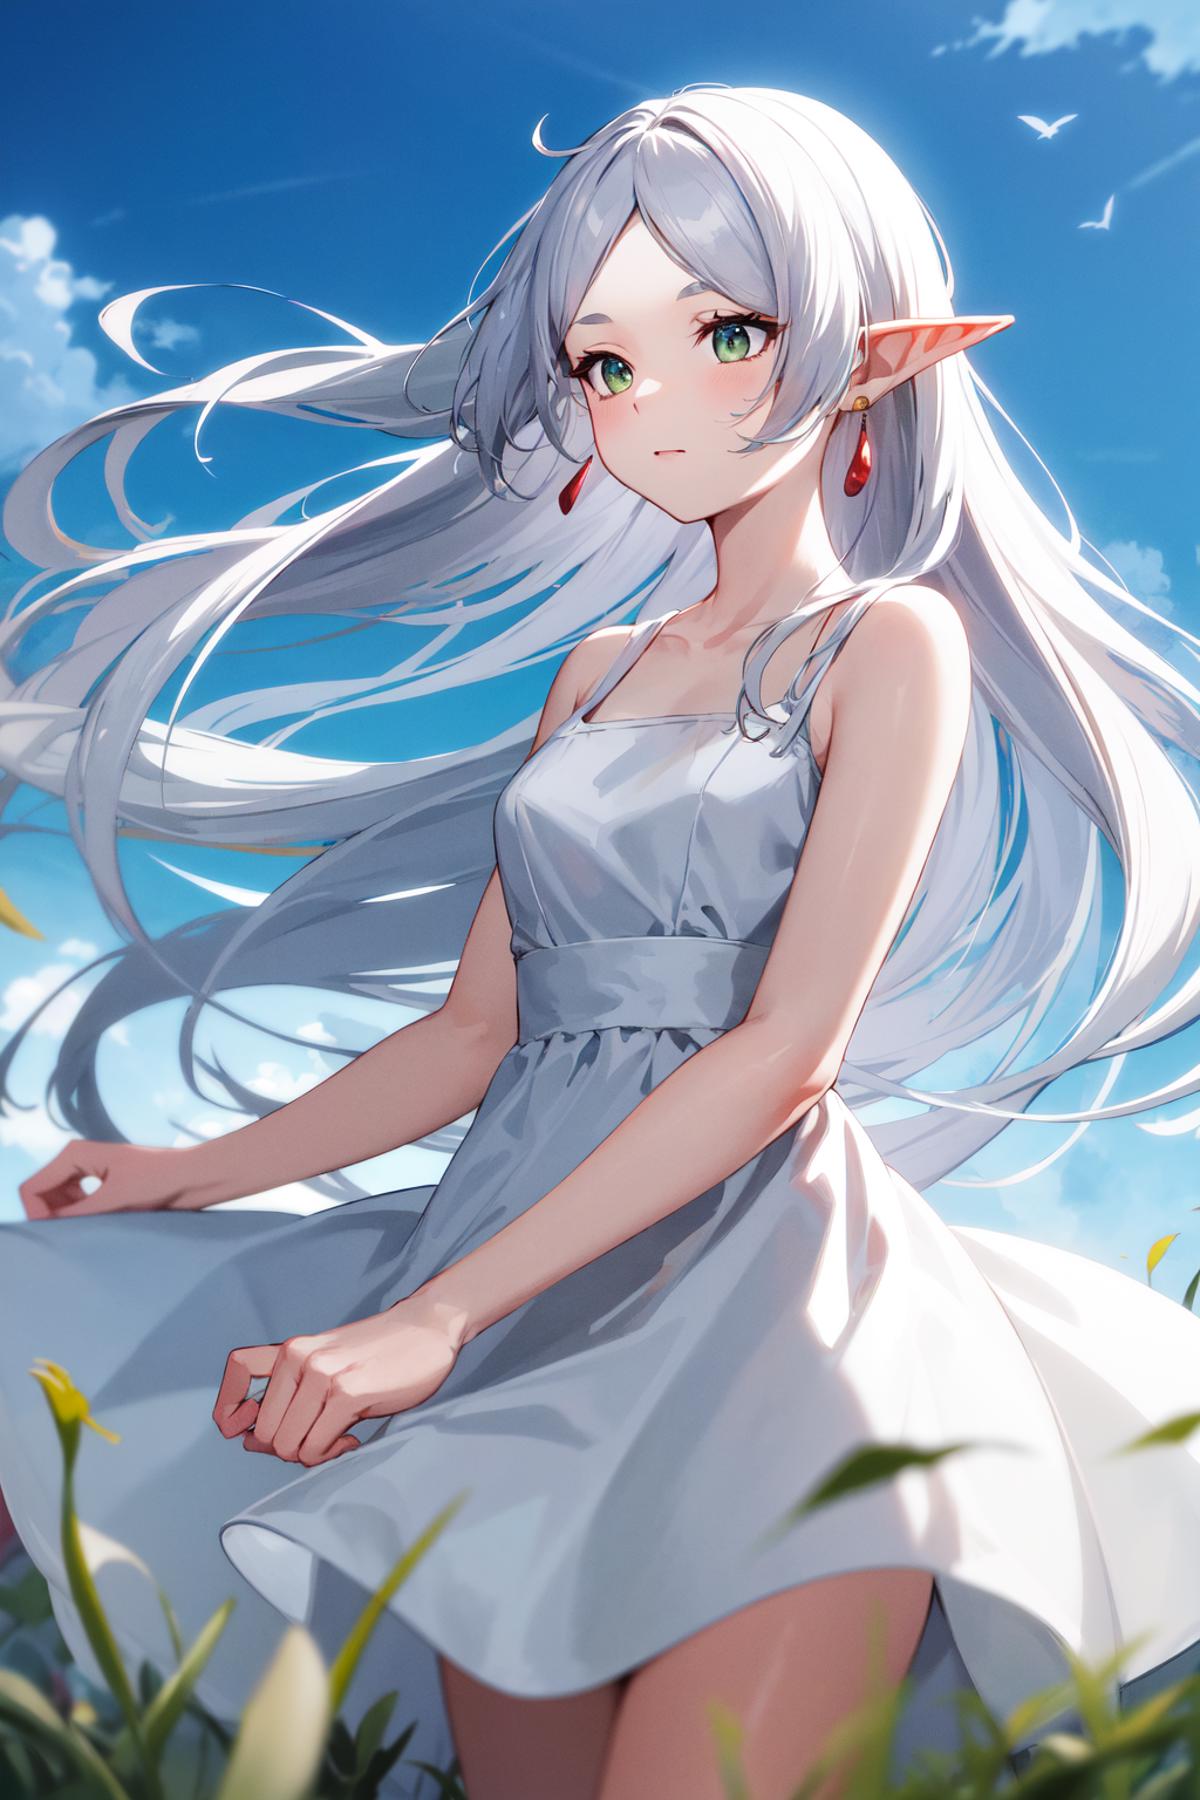 A White-Haired Female Character in a White Dress with Red Accessories.